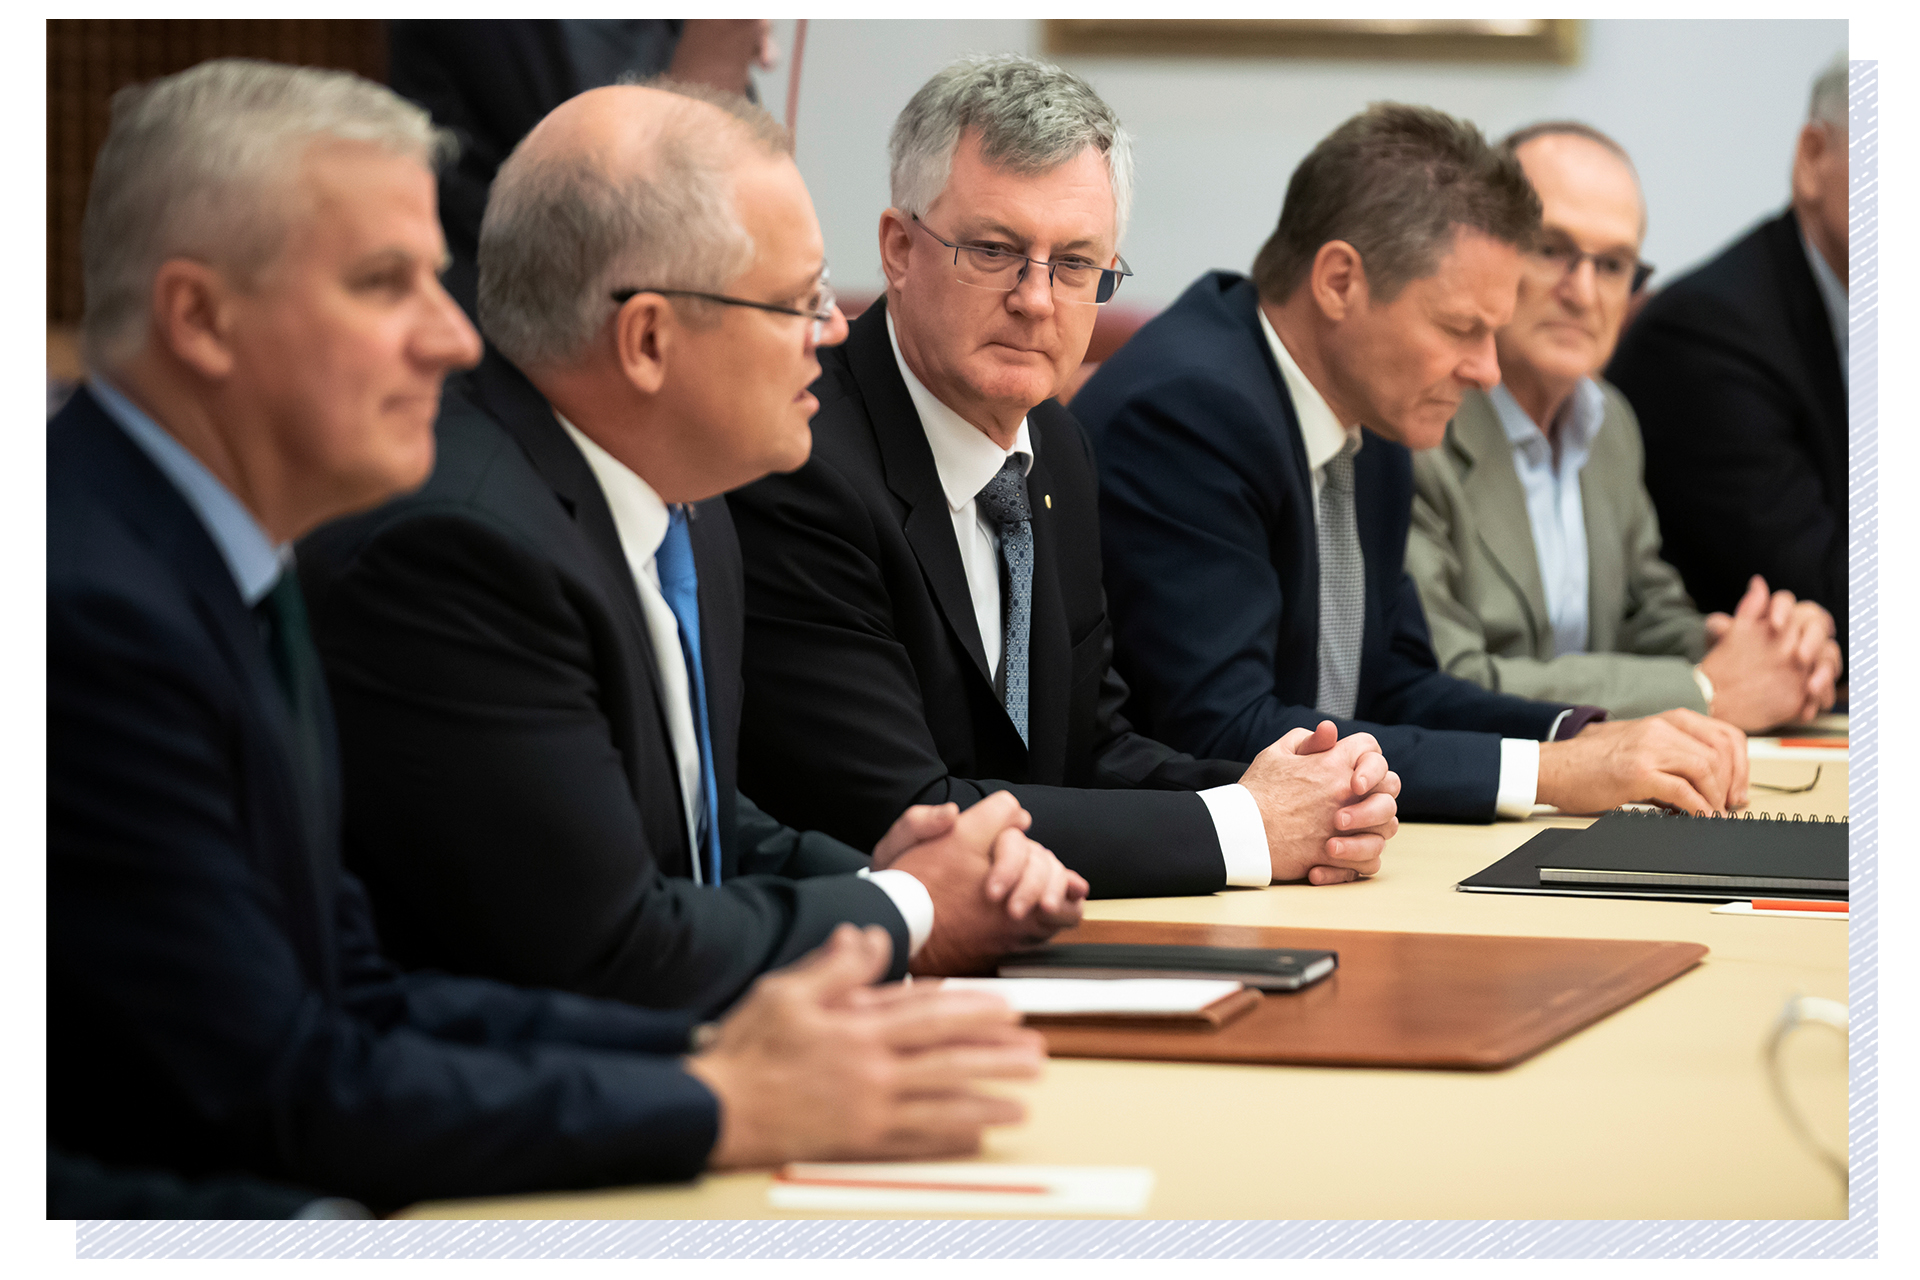 Martin Parkinson sits beside Scott Morrison at a table, flanked by other men, and looks towards him as Morrison speaks.